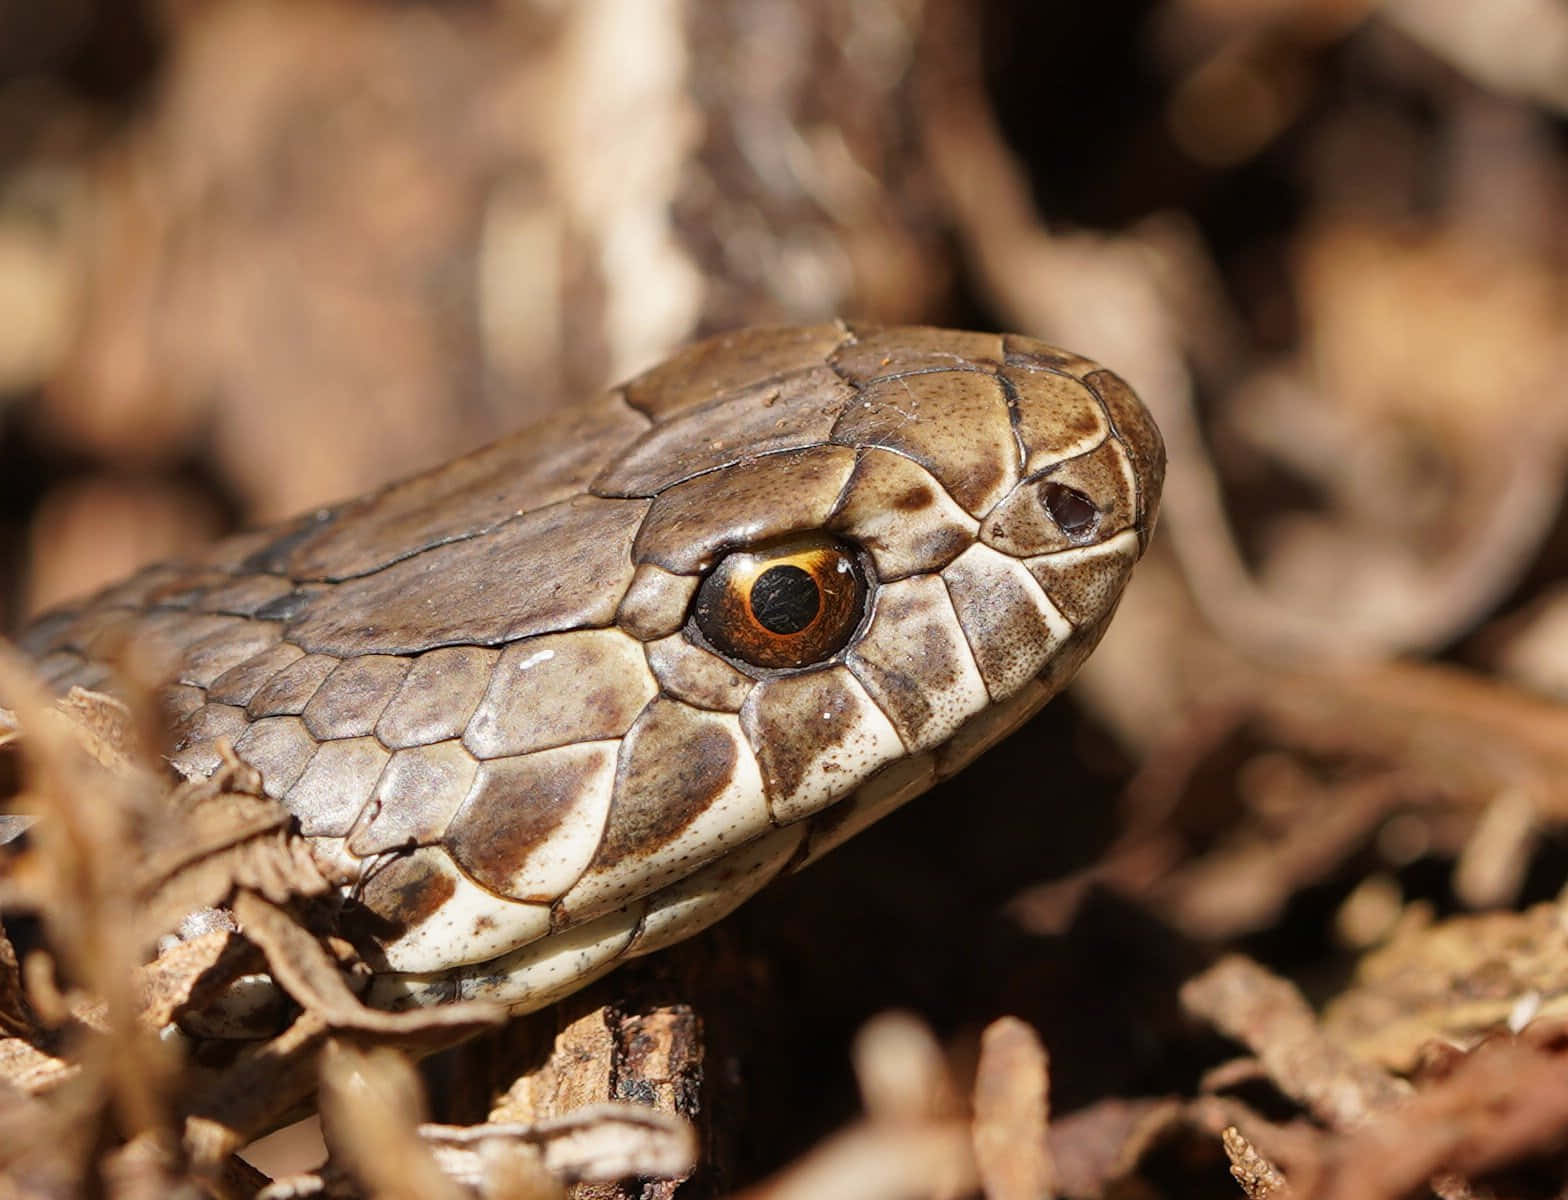 Up Close with a Copperhead Snake